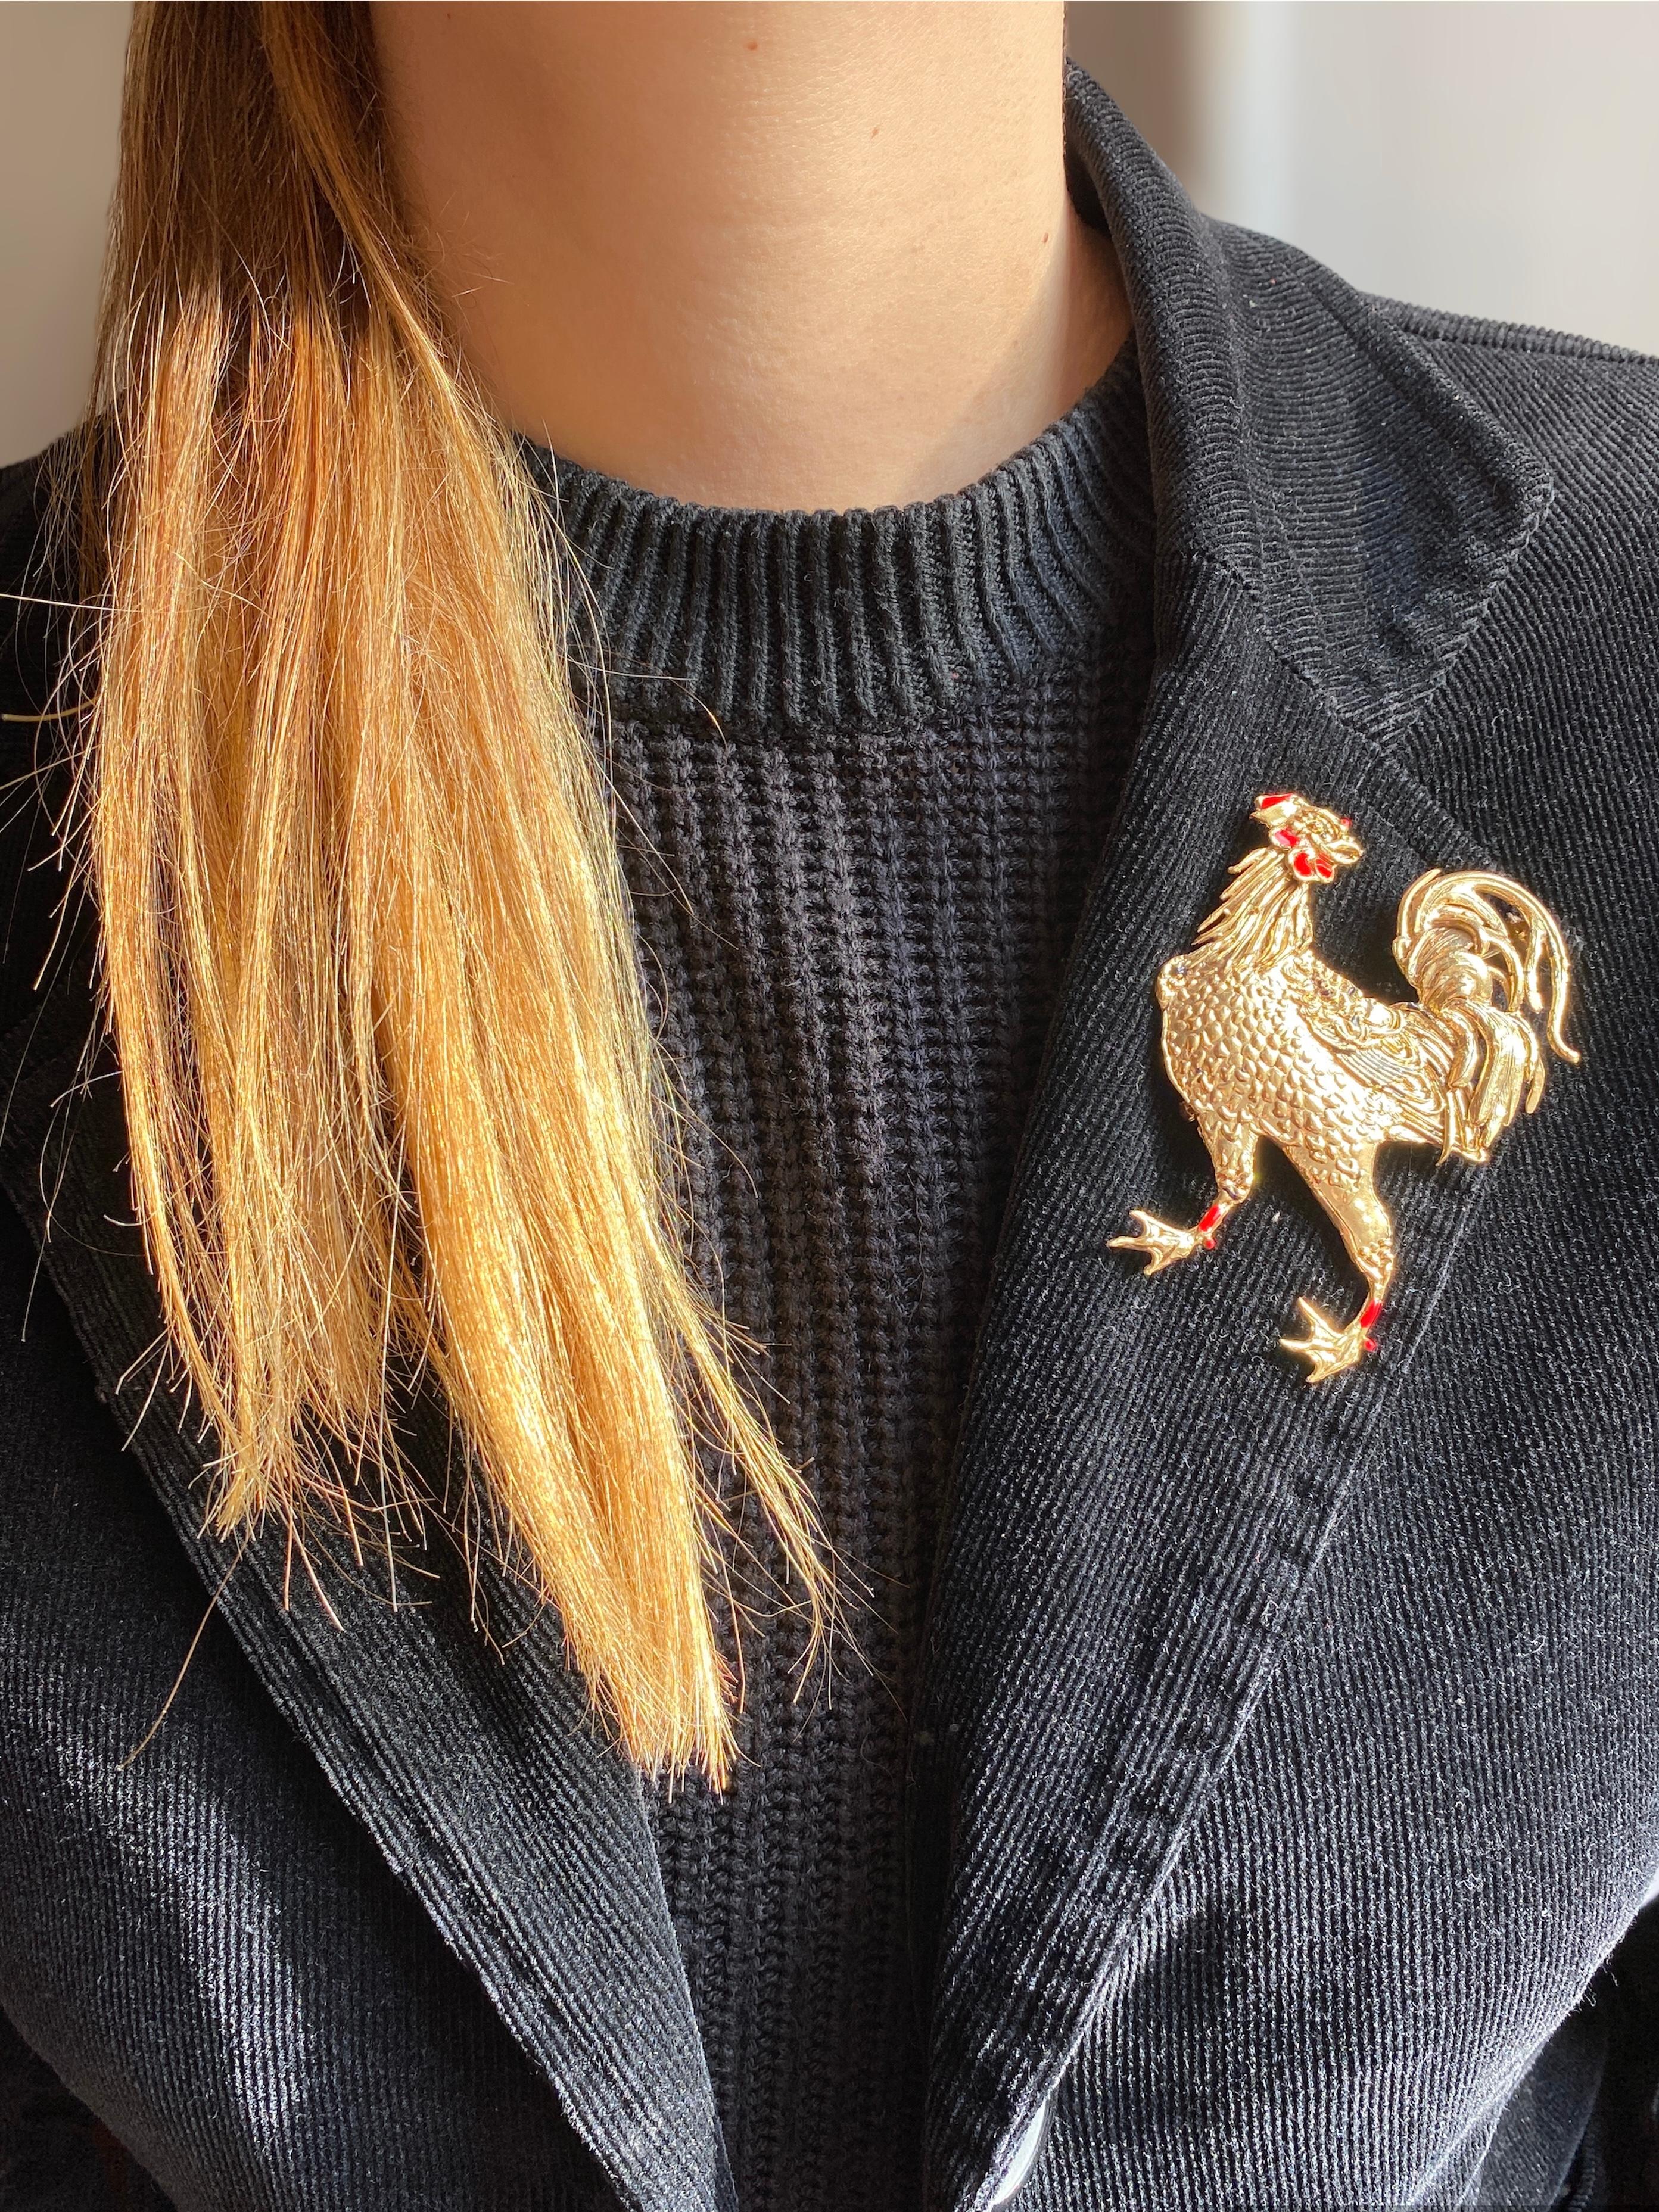 Rossella Ugolini design collection handcrafted masterpiece from Italy: a playful and dynamic Rooster brooch, meticulously crafted in bronze and plated in luxurious 24k gold. This charming creation features enameled wattles in vibrant red, with